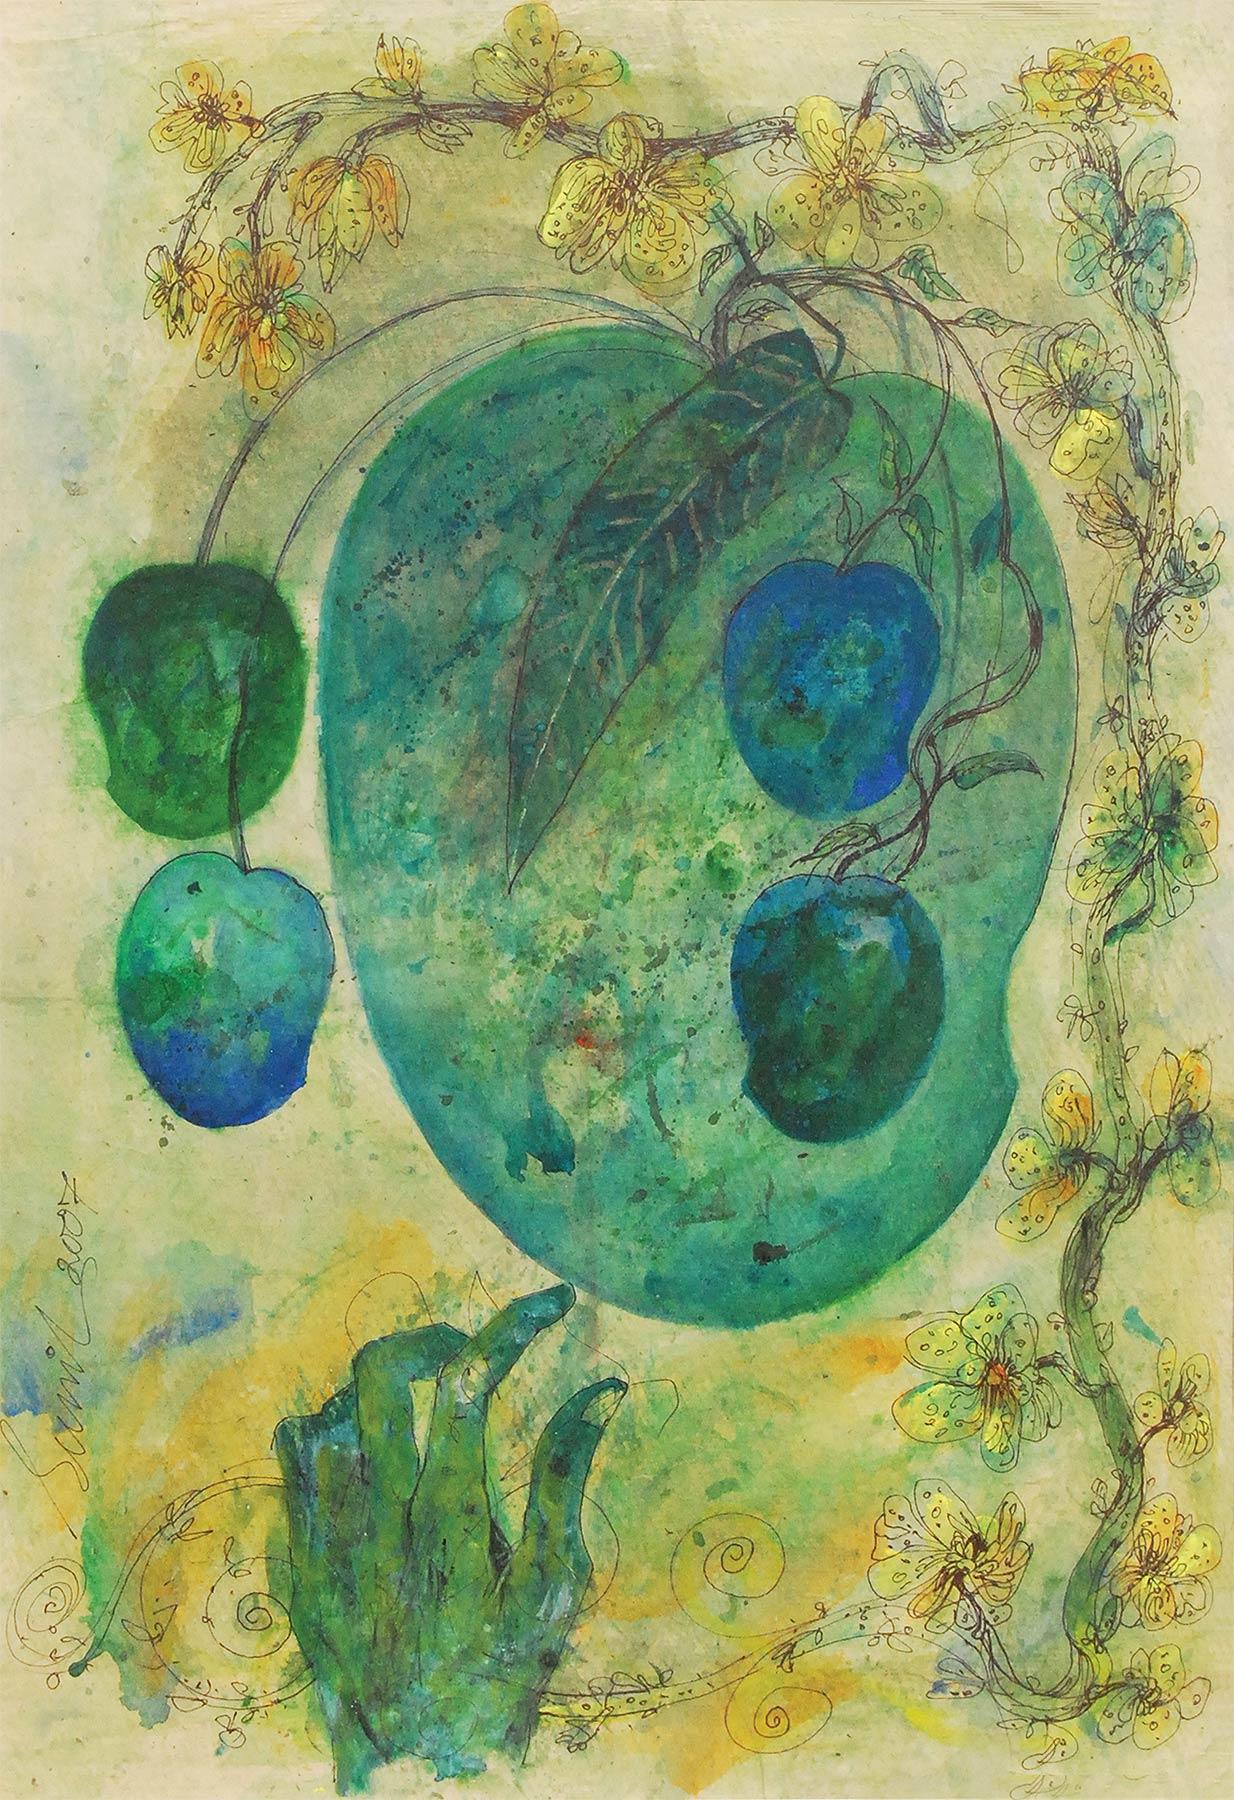 Sunil Das - Mangoes - 30 x 20 inches (unframed size)
Mixed Media on Paper
Inclusive of shipment in ready to hang form.

Sunil Das (1939-2015) was a Master Modern Indian Artist from Bengal. Extremely successful right from his college days, Sunil Das